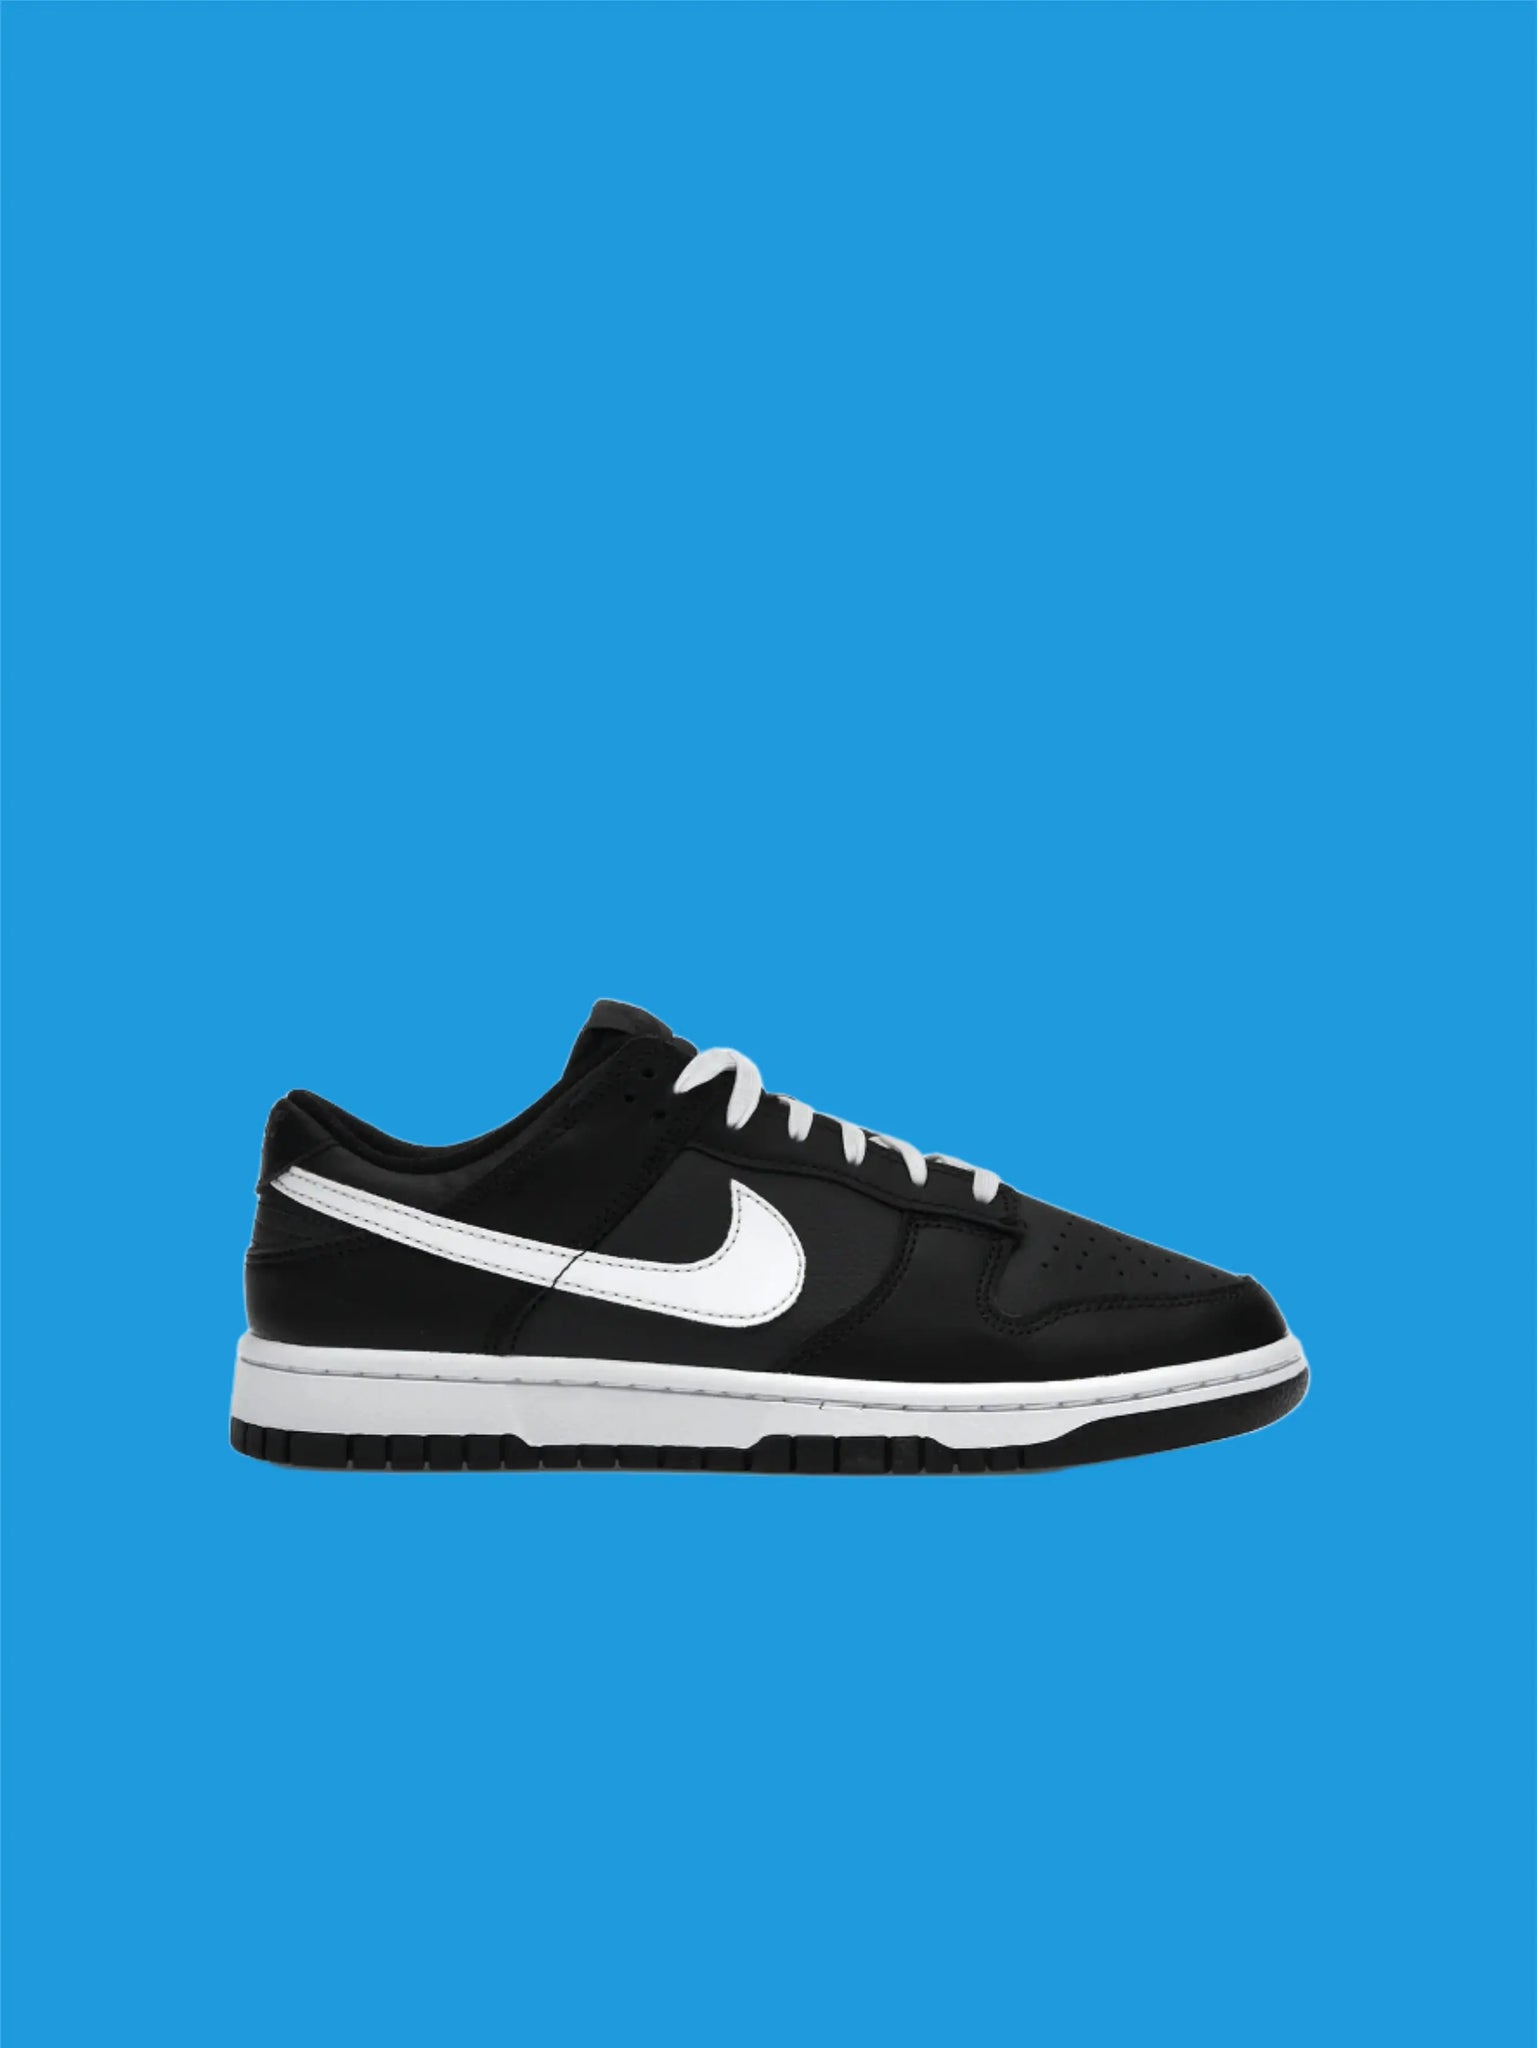 Nike Dunk Low Black White (2022) (GS) in Auckland, New Zealand - Shop name